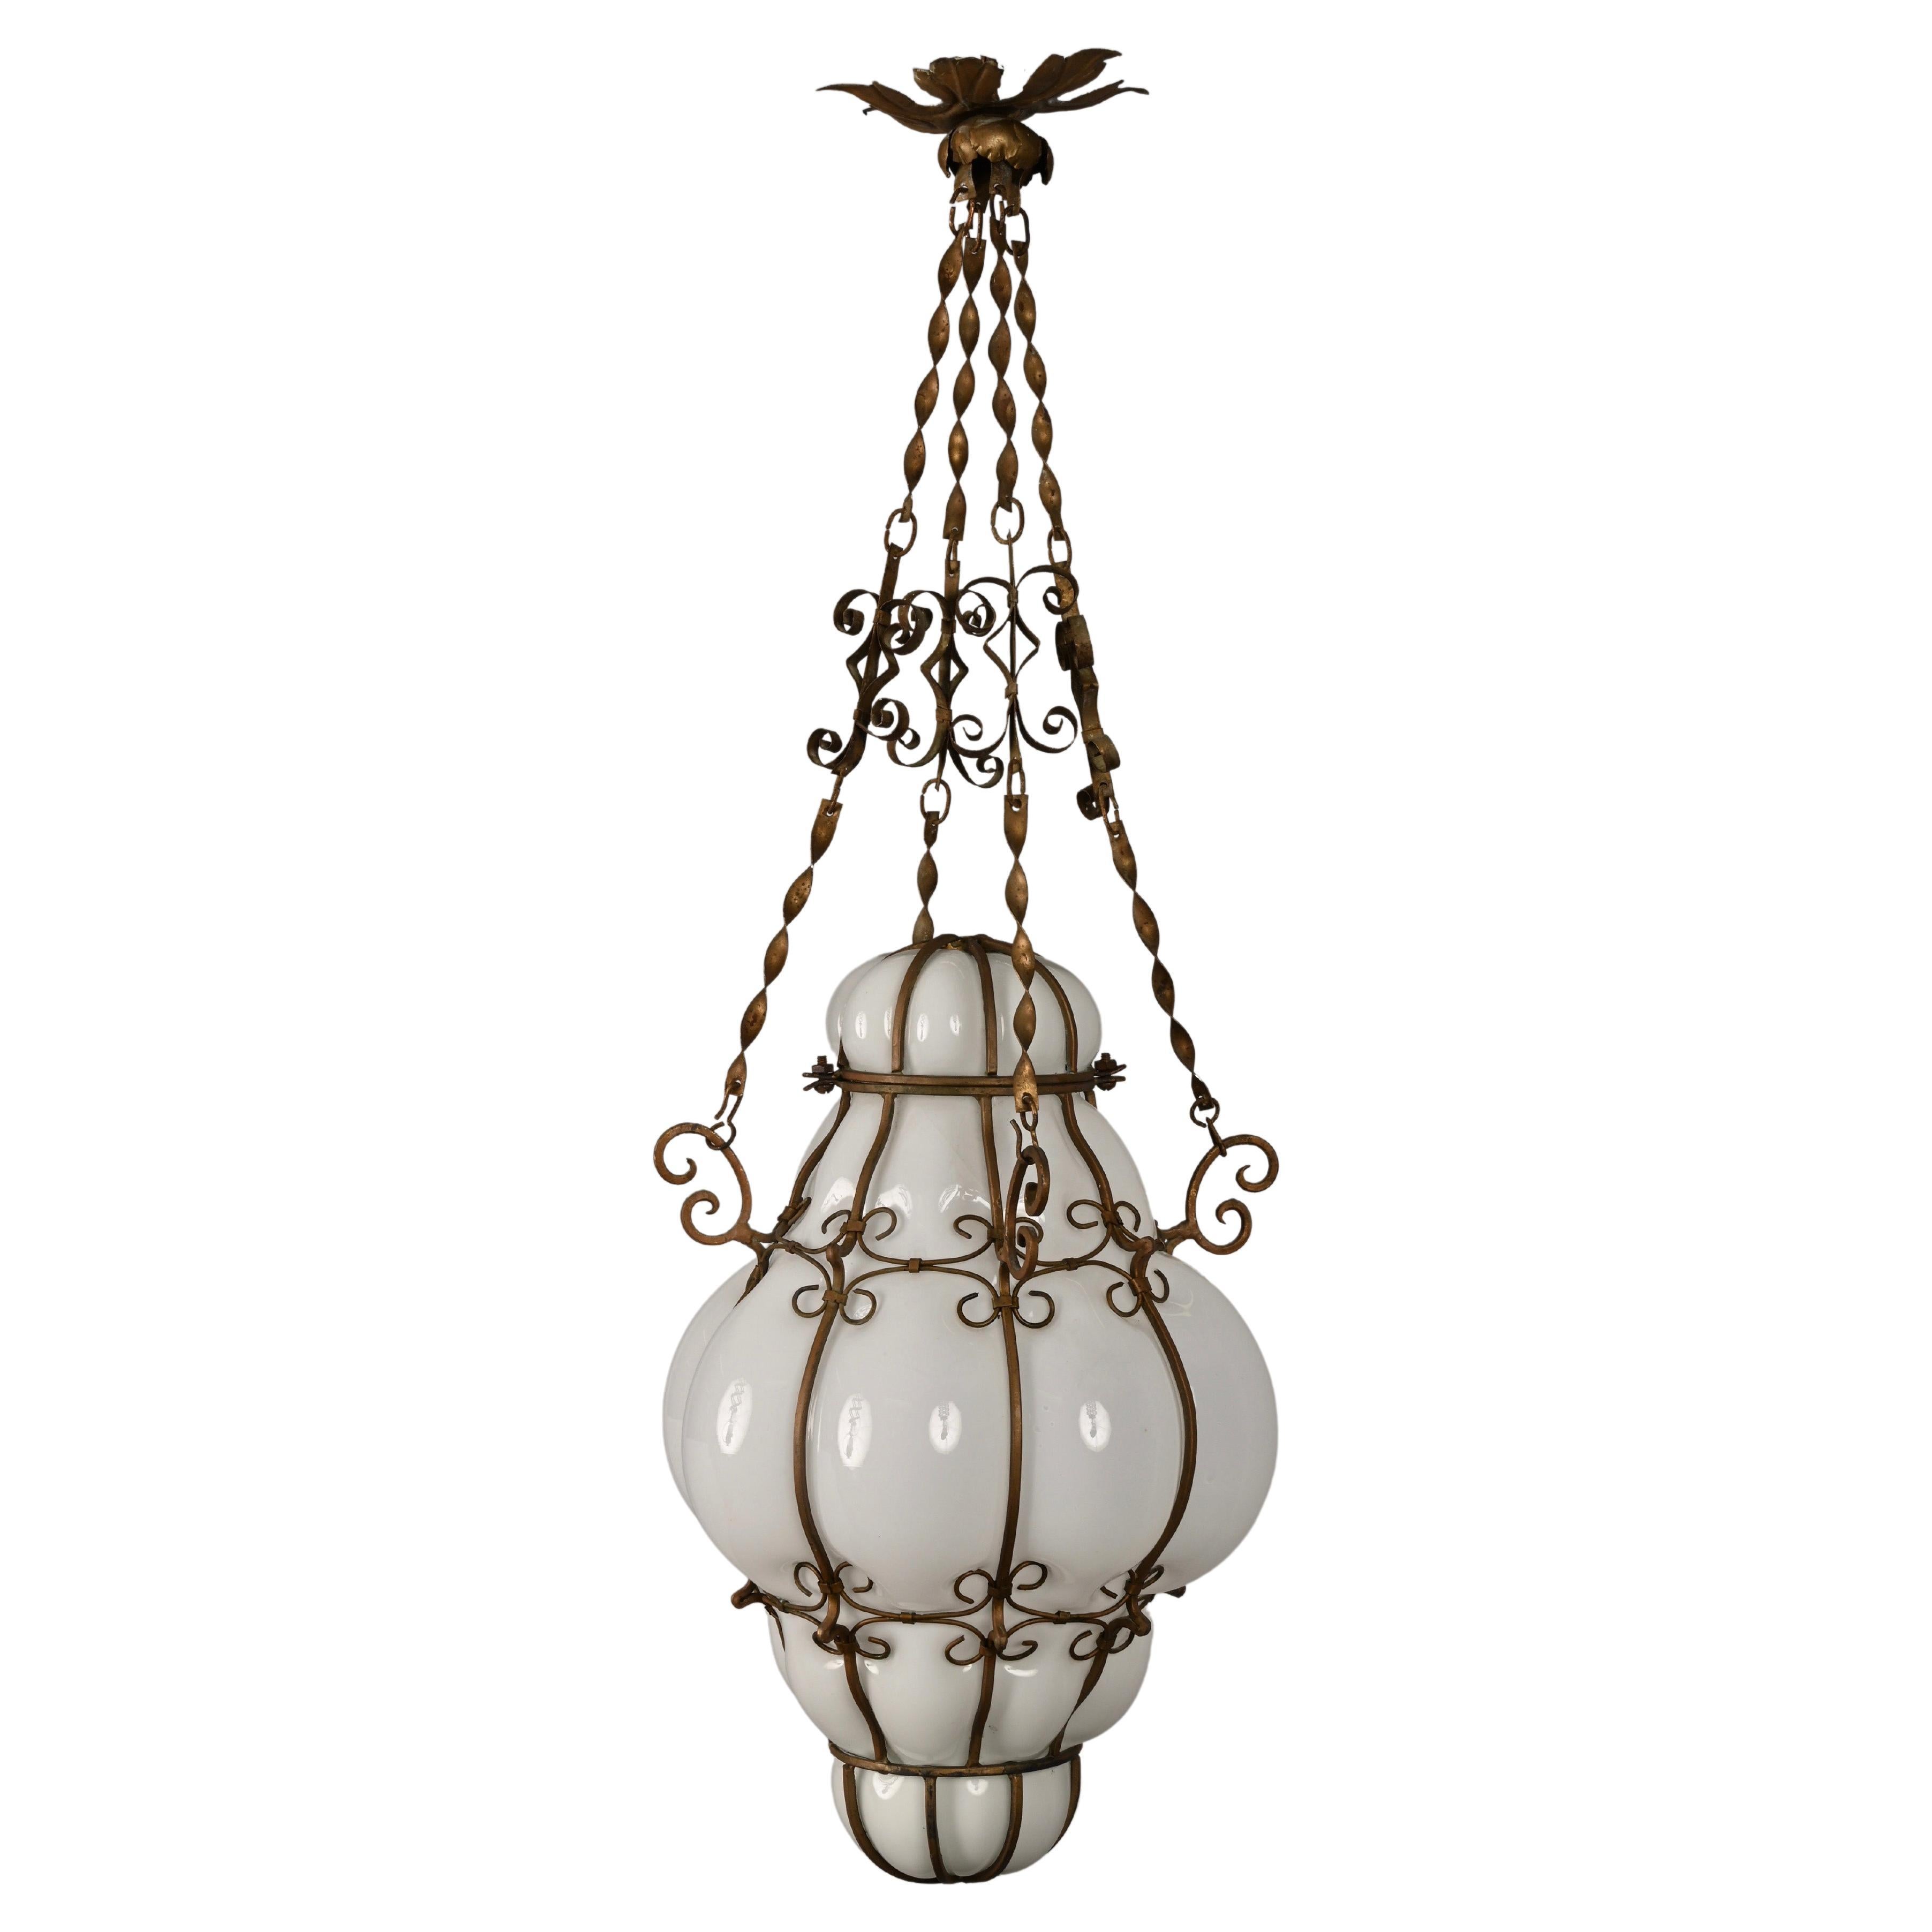 Midcentury Venetian Brass and Mouth Blown Murano White Glass Chandelier, 1940s